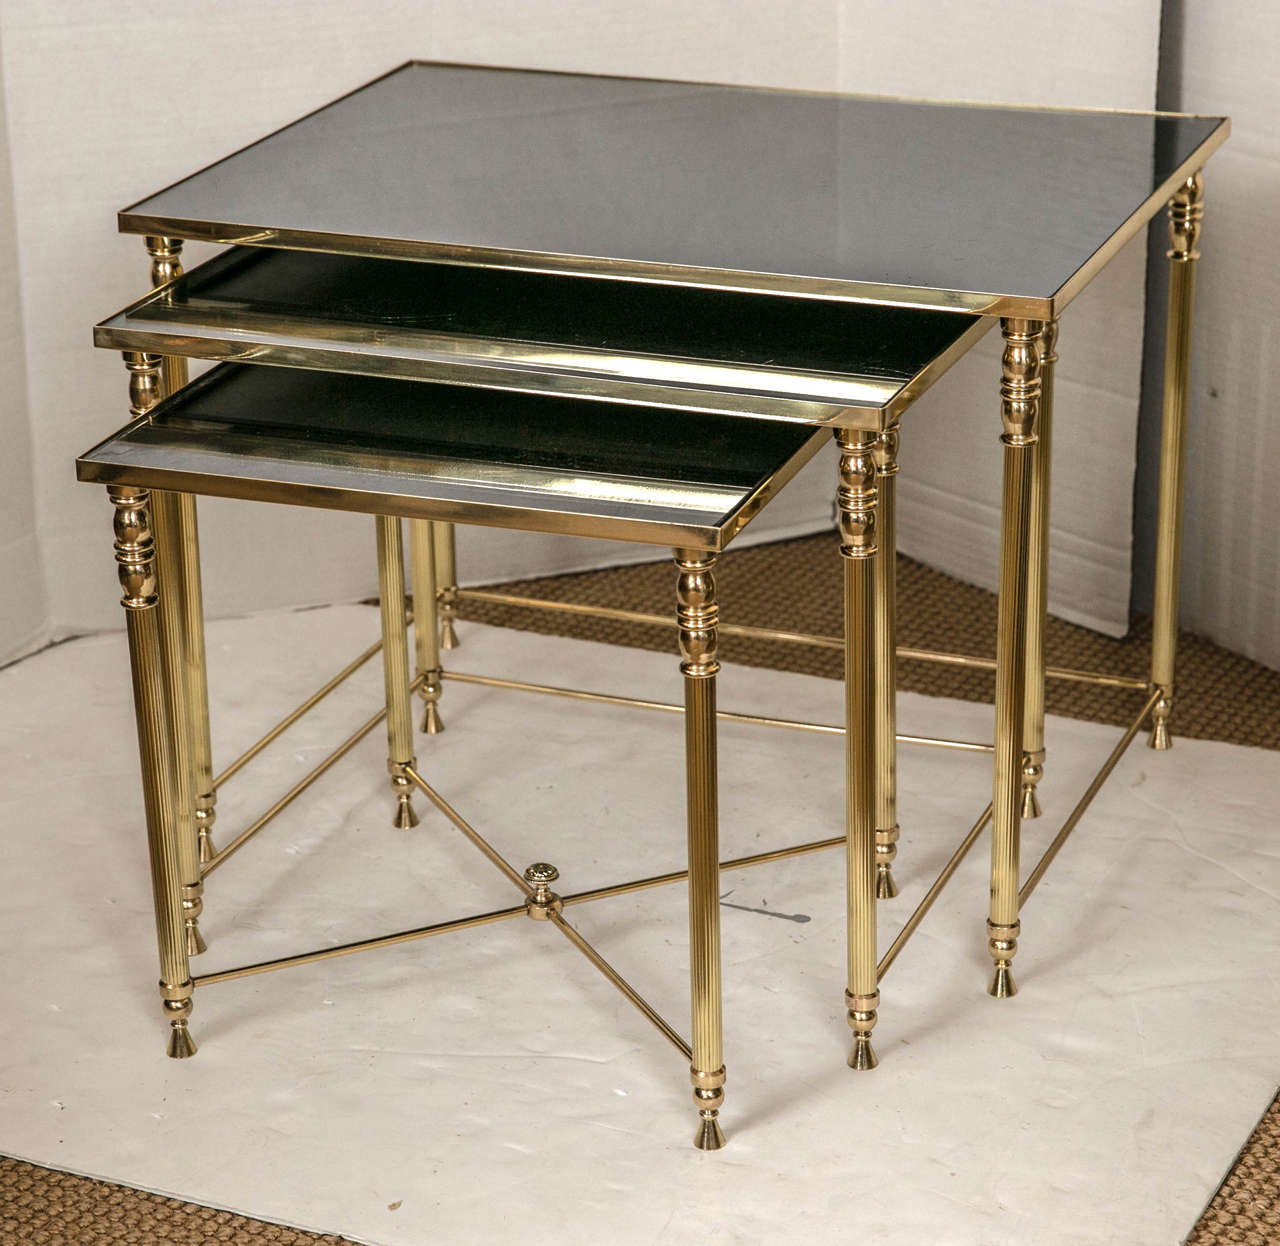 A group of three French brass and antique black mirrored glass nesting or stacking tables. Delicate tapered and fluted legs and an X-stretcher with a finial on the smallest table.
All brass has been professionally polished and clear lacquered.